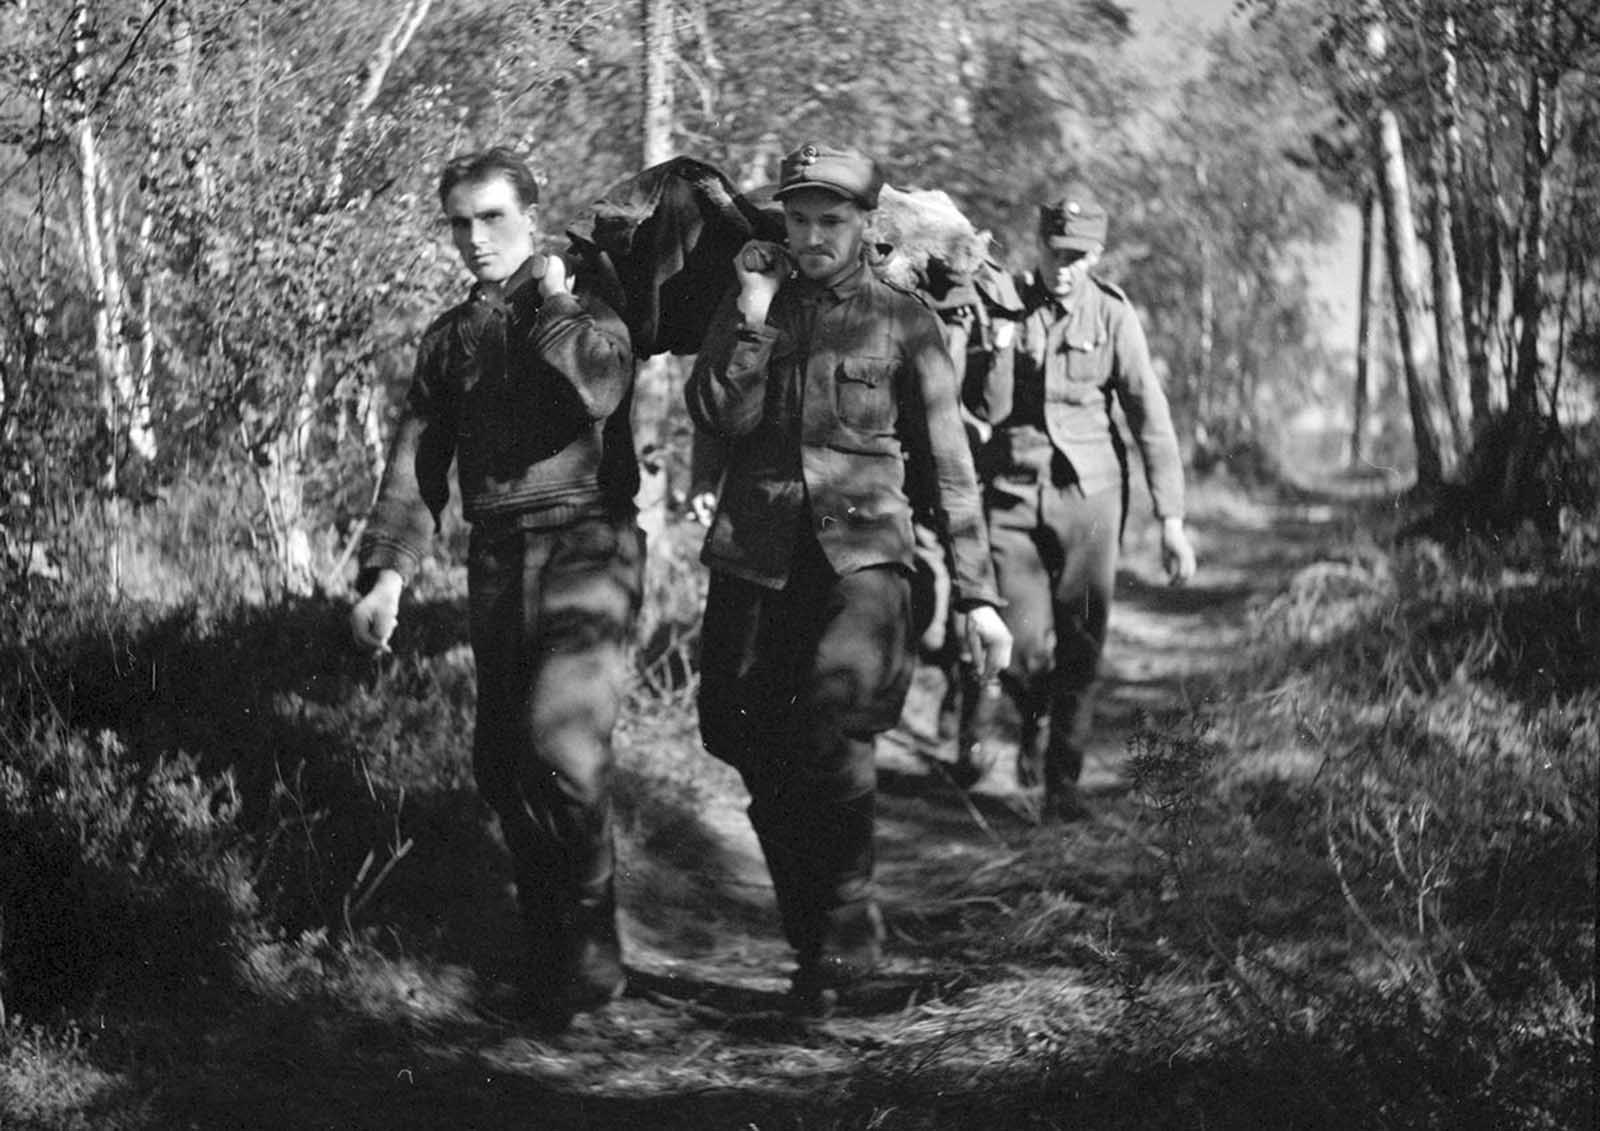 Soldiers carry a wounded man on a path.